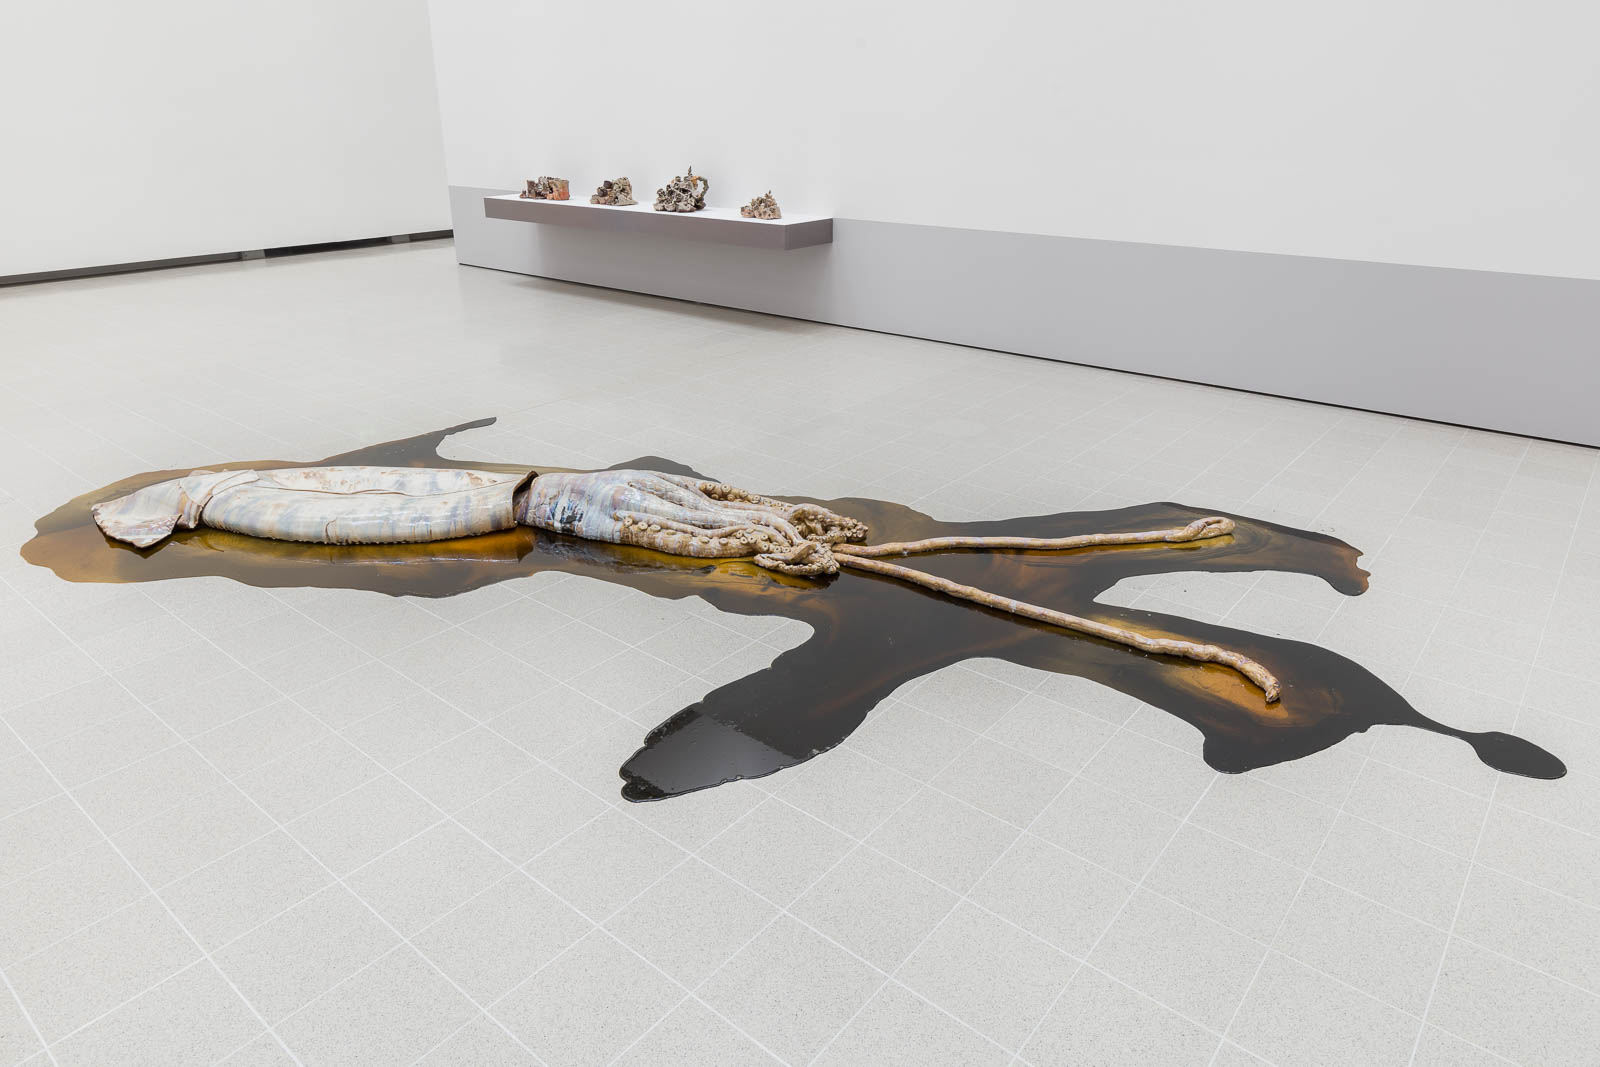 The installation view of David Zink Yi’s ceramic squid along with the works of Aaron Angell